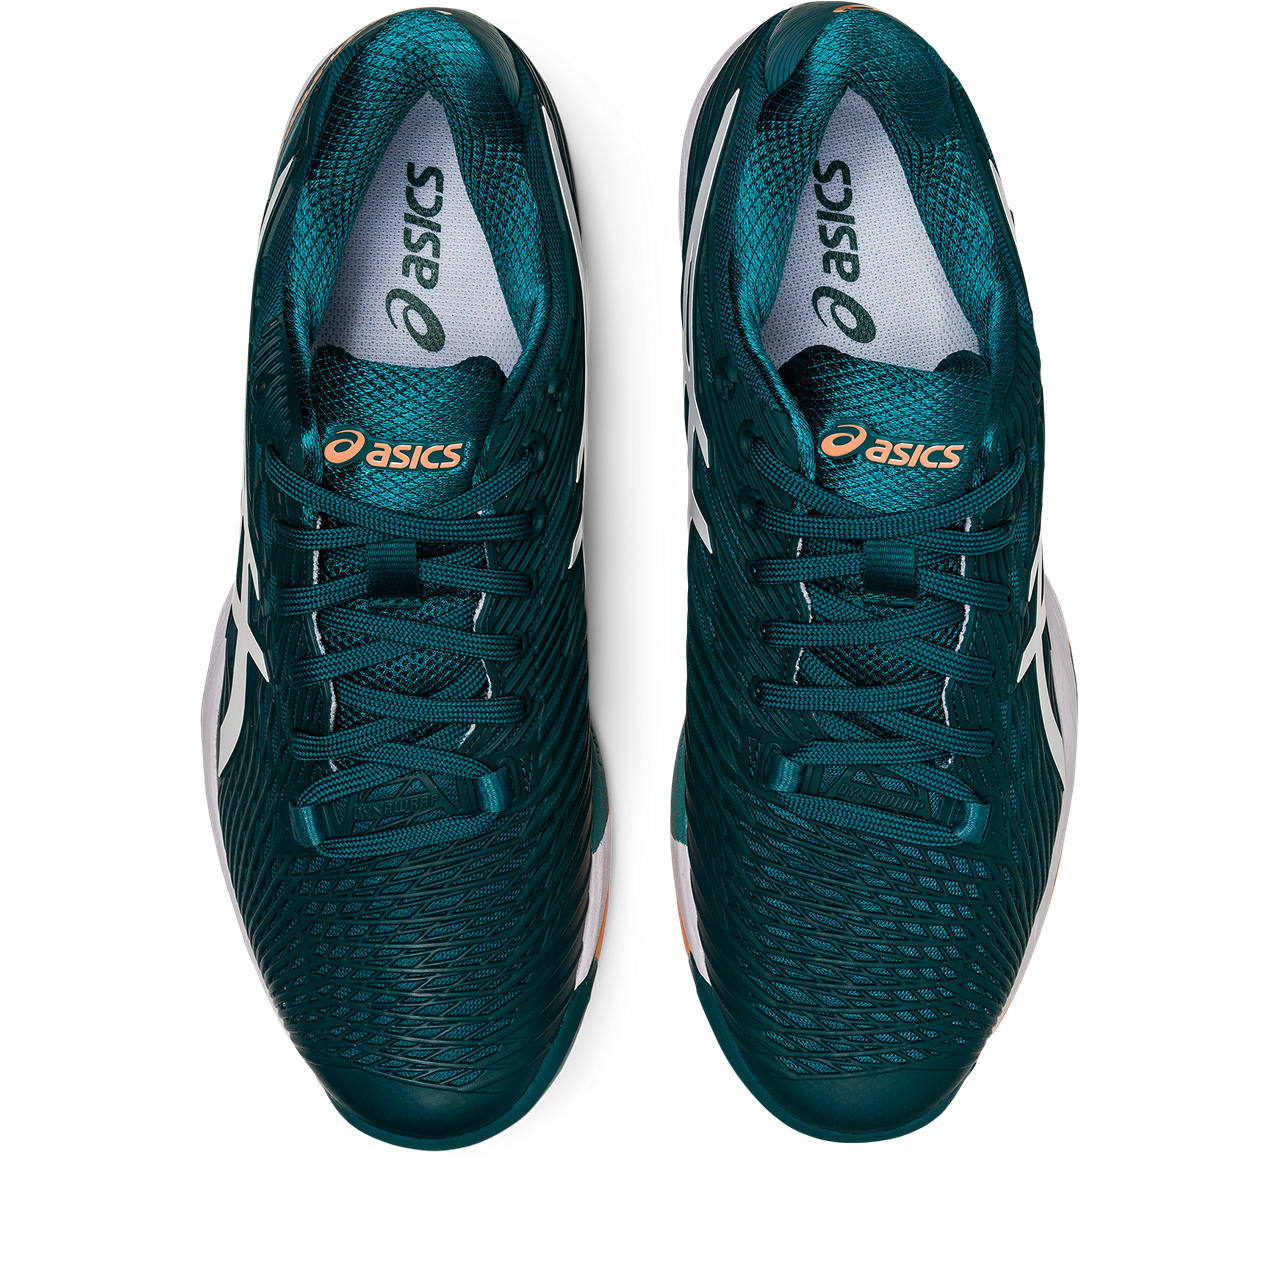 Top view of the Men's Solution Speed FF 2 tennis shoe by ASIC in the color Velvet Pine/White